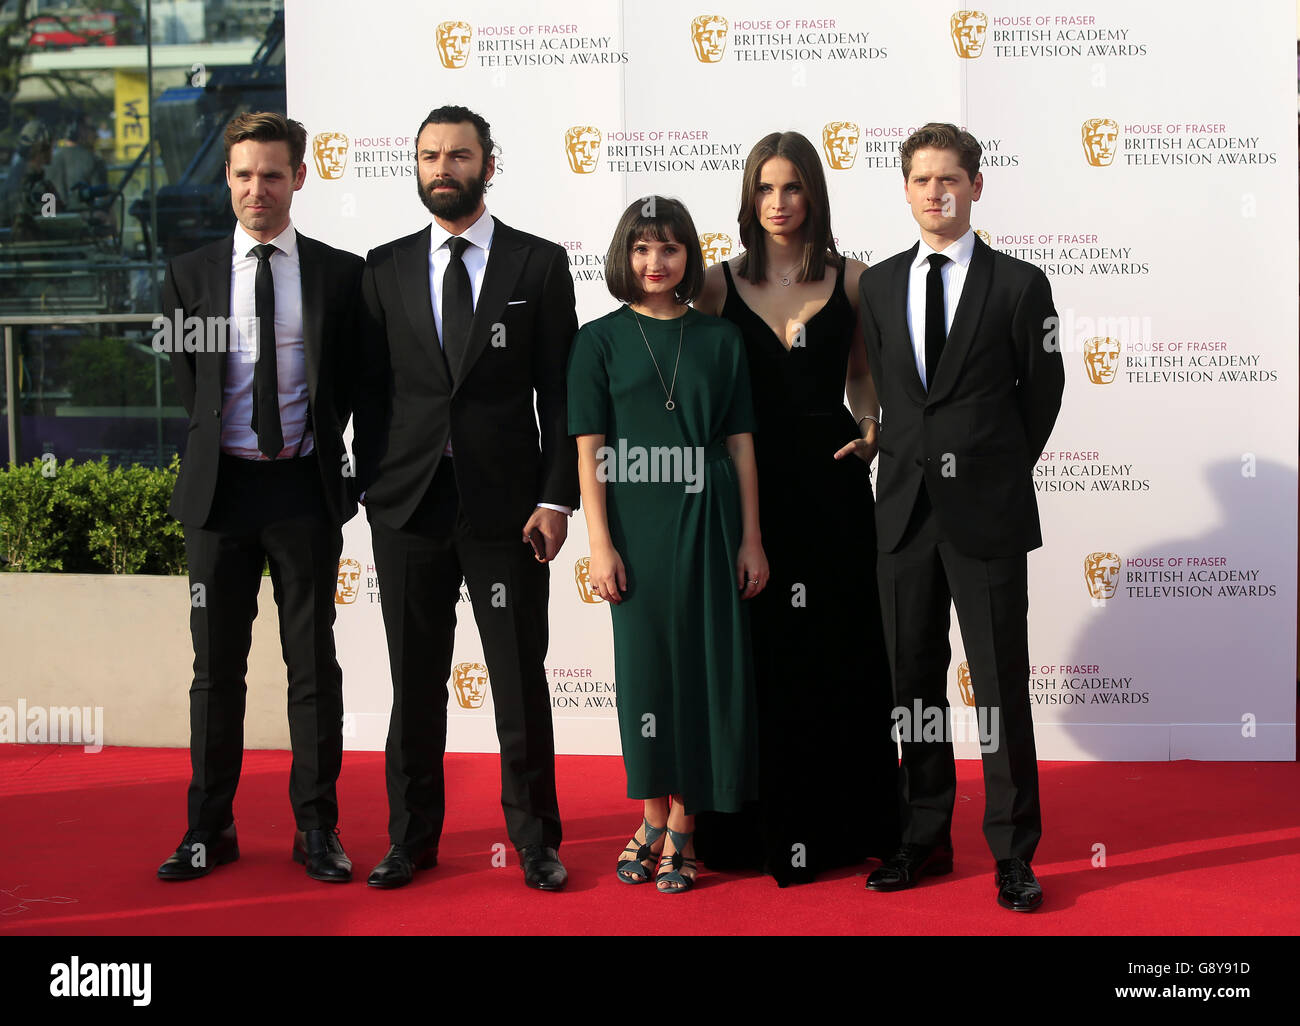 L-R) Luke Norris, Aiden Turner, Ruby Bentall, Heida Reed and Kyle Soller  attending the House of Fraser BAFTA TV Awards 2016 at the Royal Festival  Hall, Southbank, London. PRESS ASSOCIATION Photo. Picture